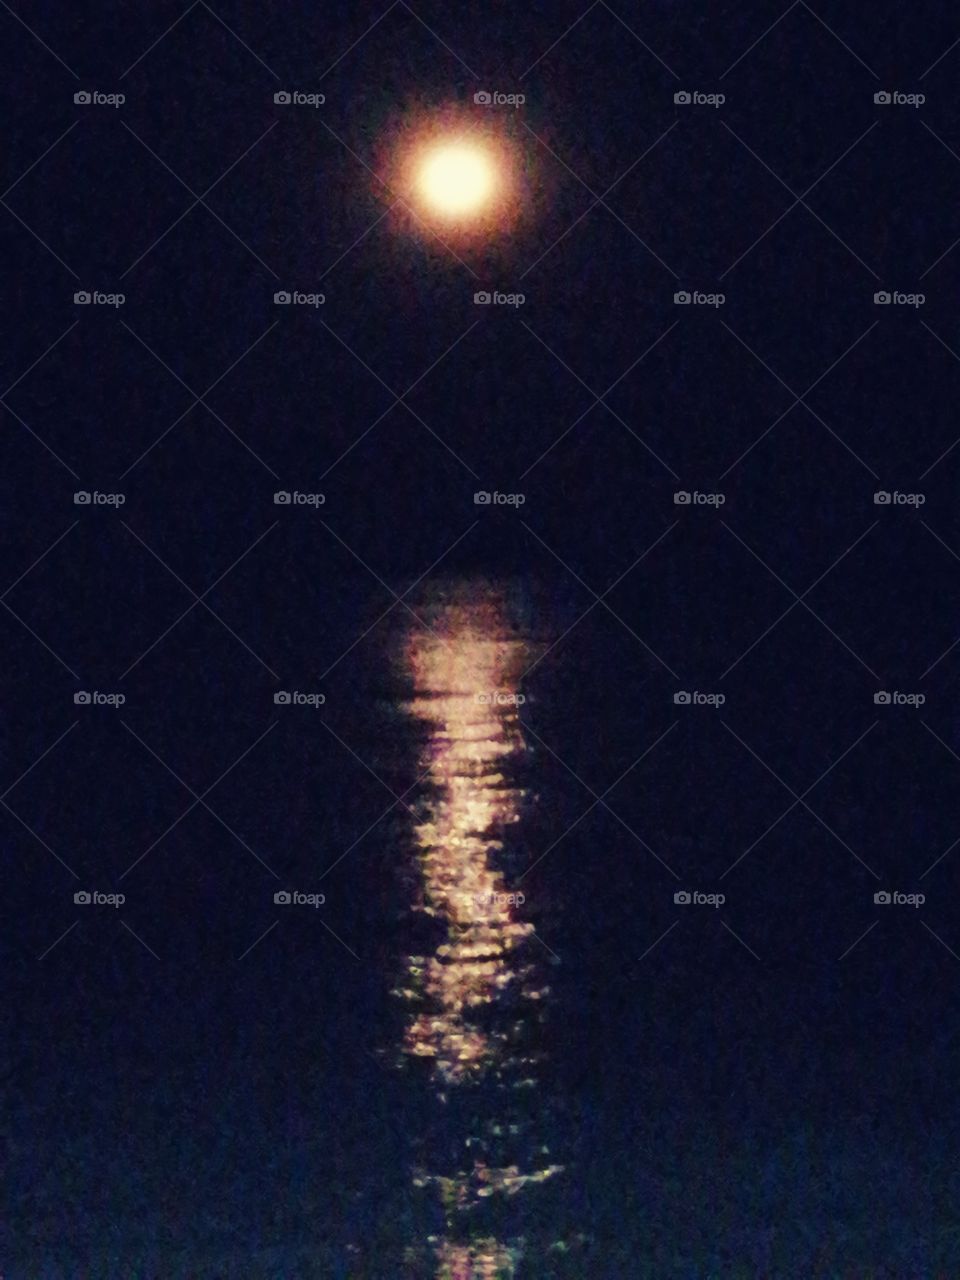 My once in a lifetime beach "super moon" experience.